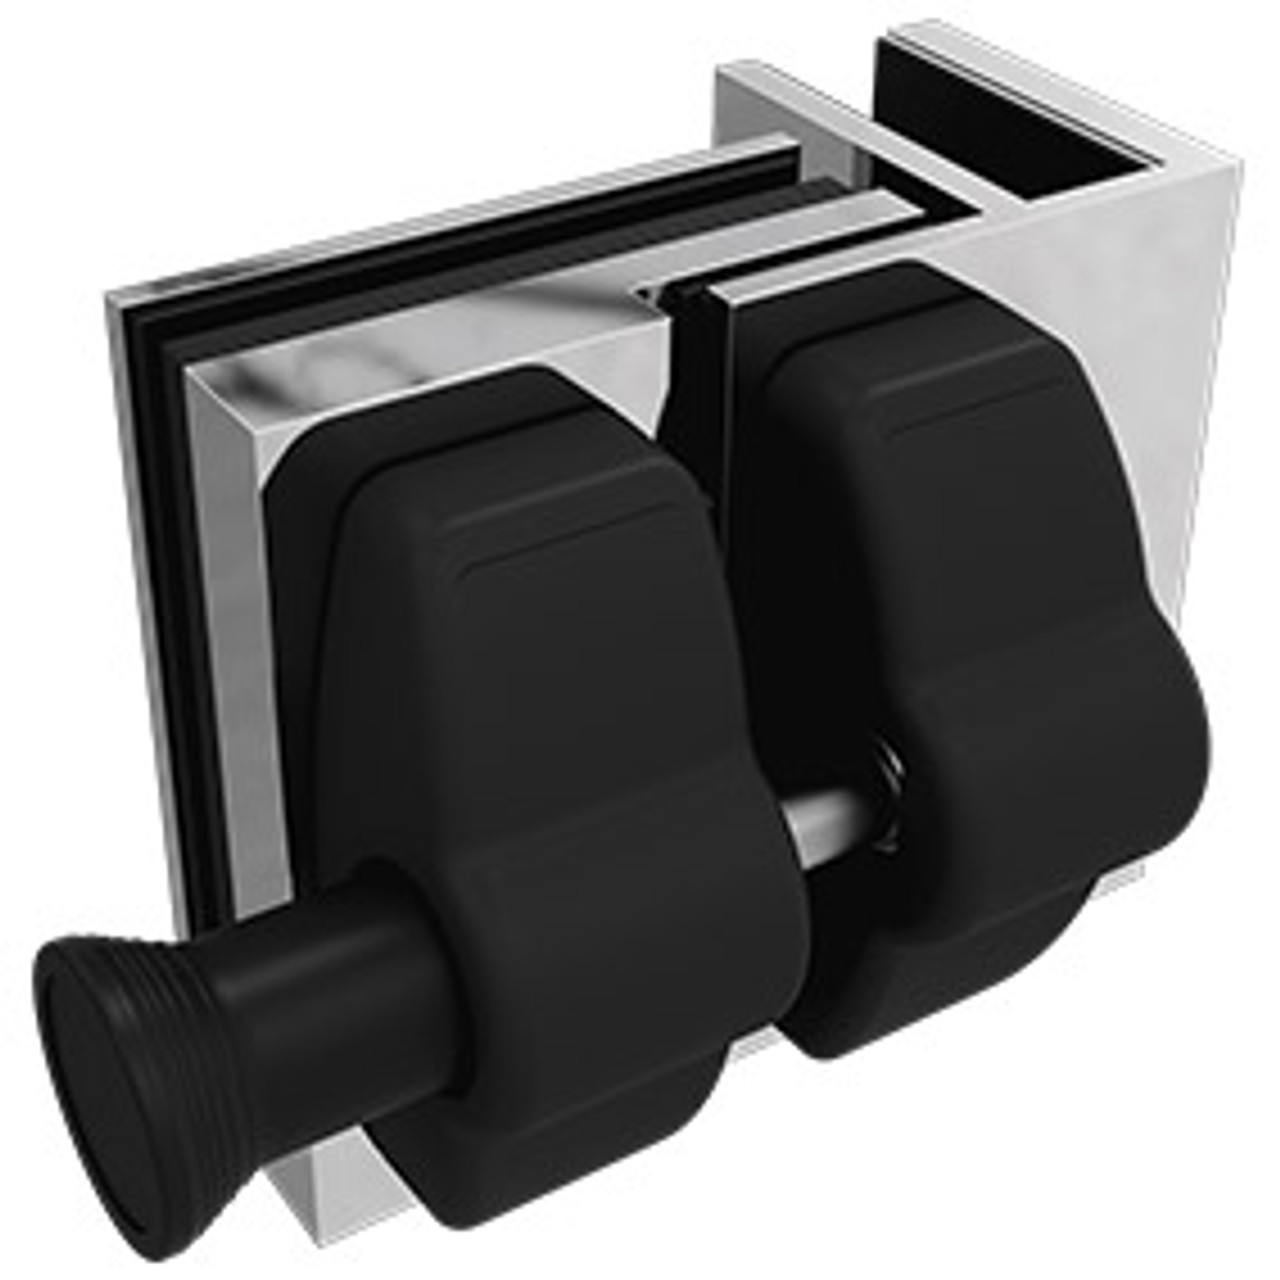 Internal 90-Degree Corner Latch Option - EXTRA COST option to SWAP the standard latch in our gate kits for an Internal Corner Latch.